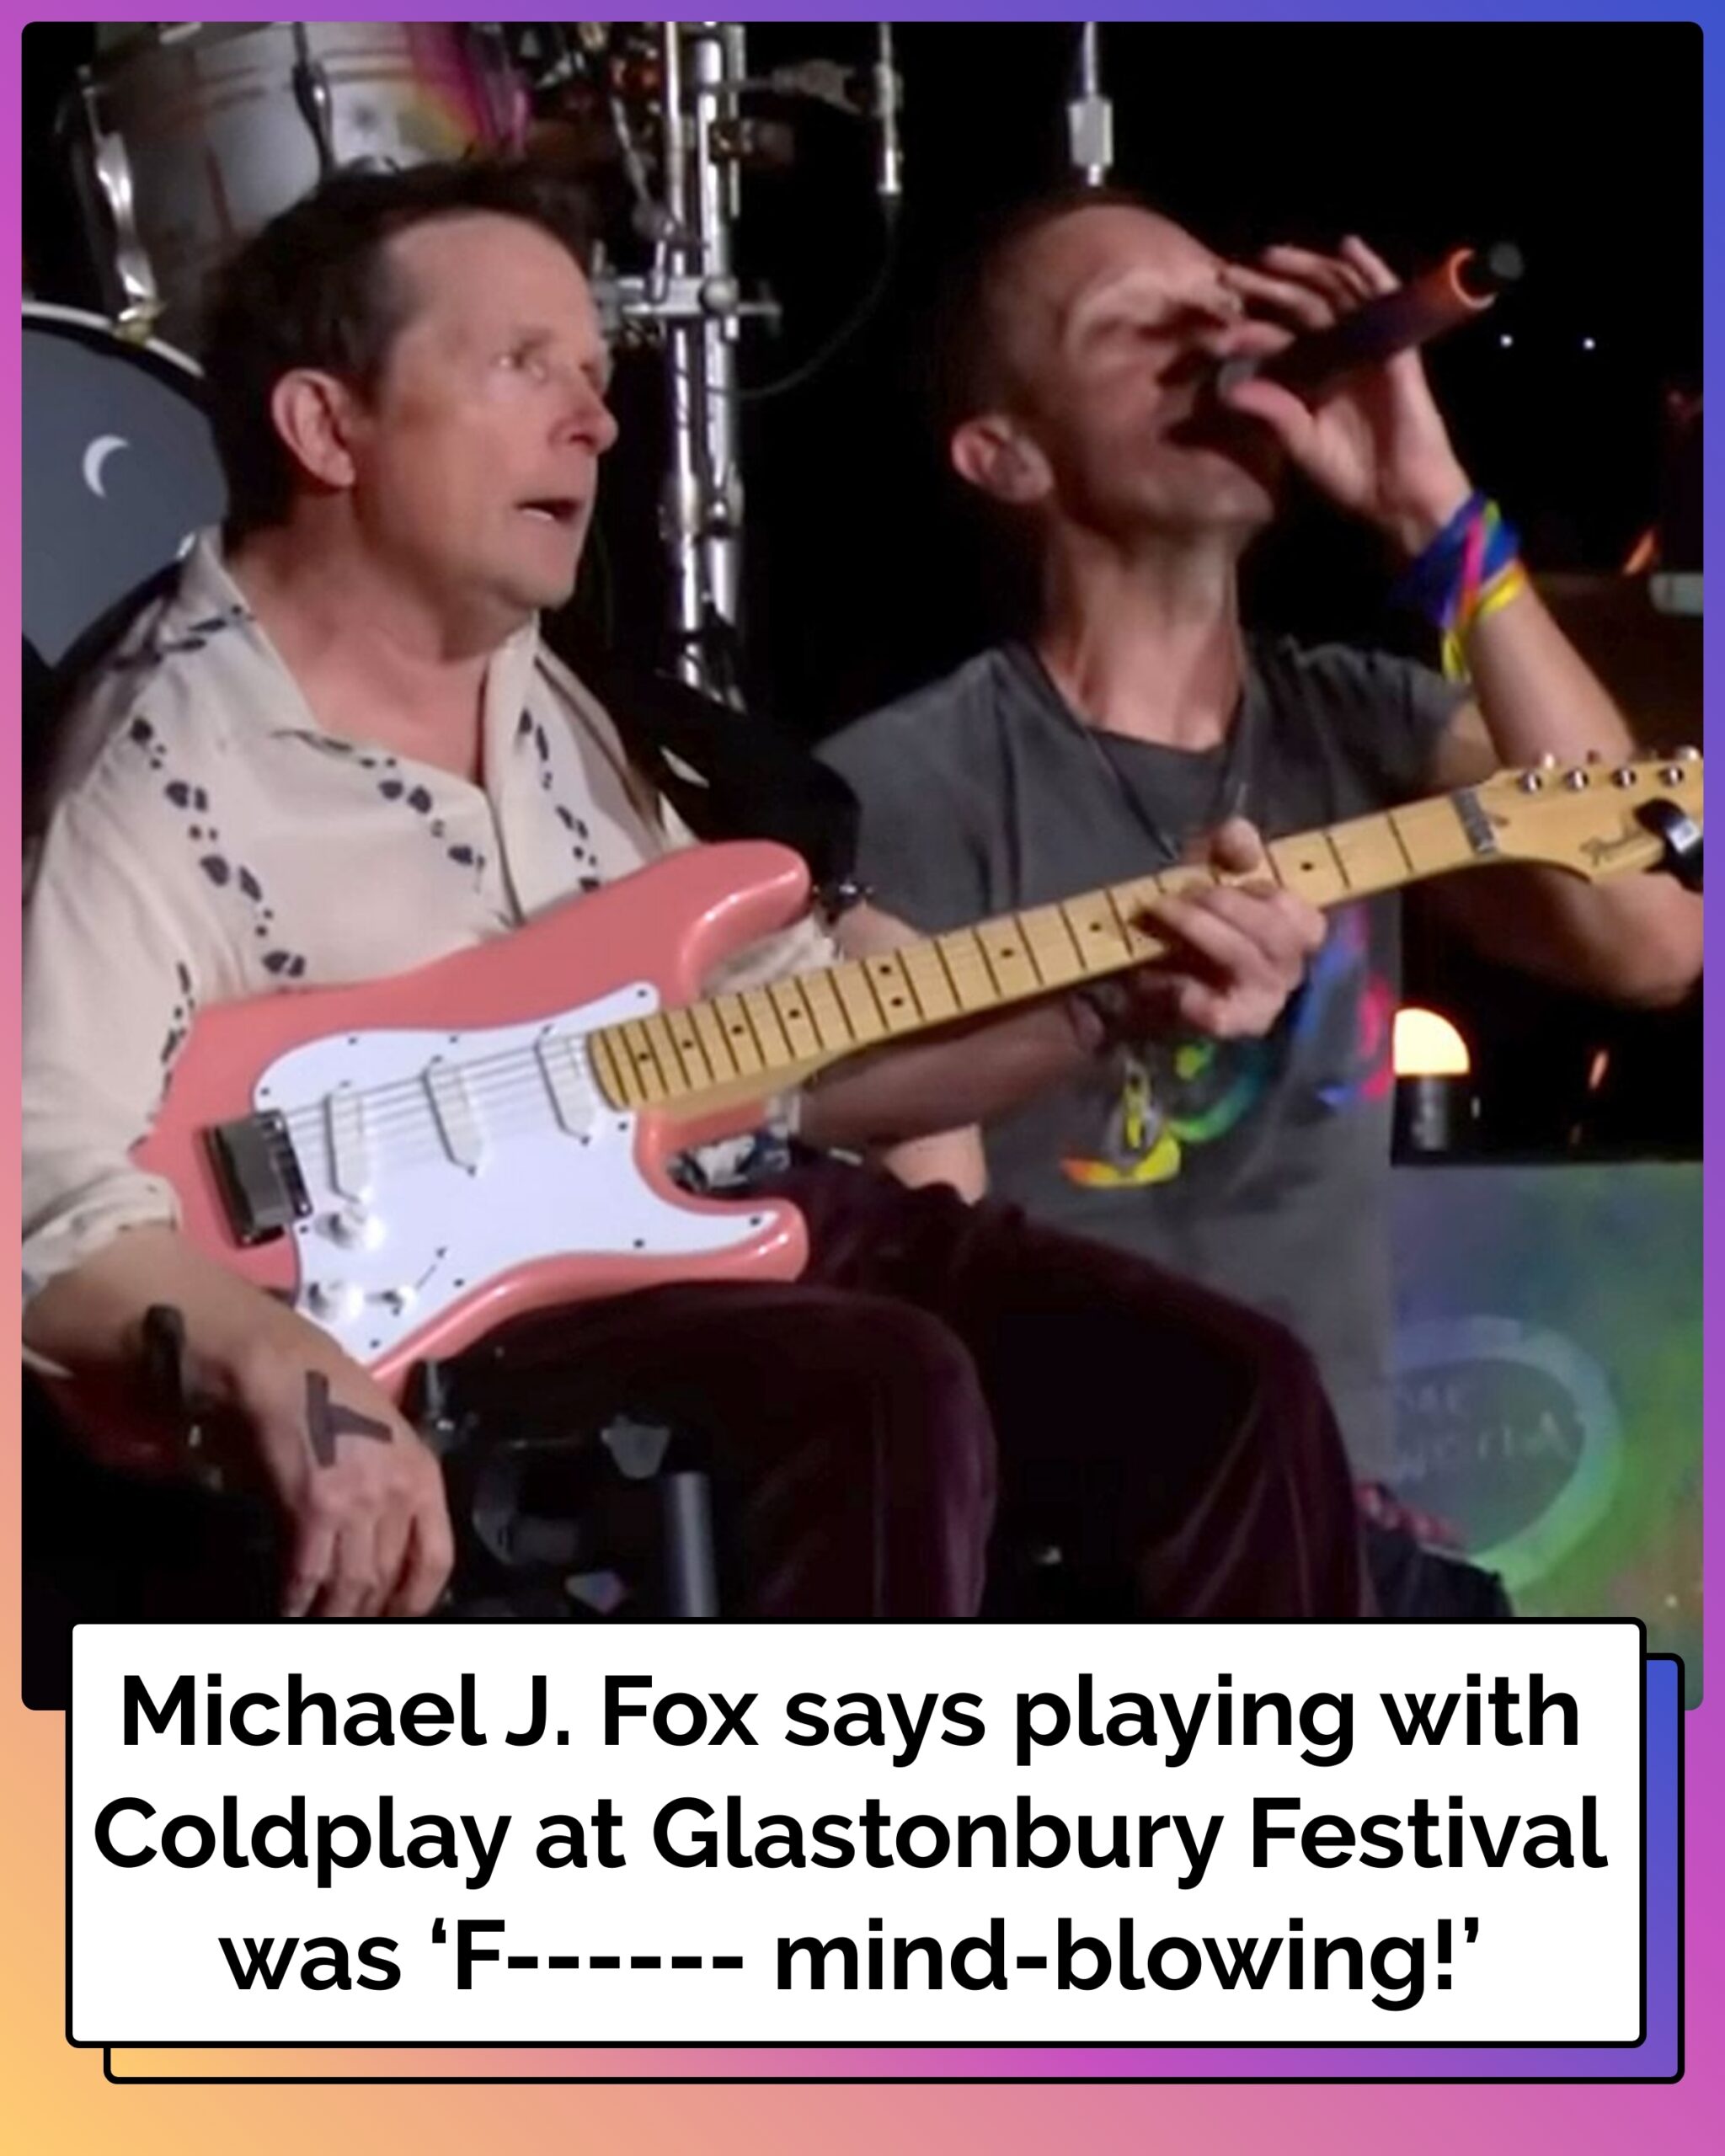 Michael J. Fox Says It Was ‘F—— Mind-Blowing’ Playing with Coldplay at Glastonbury Festival